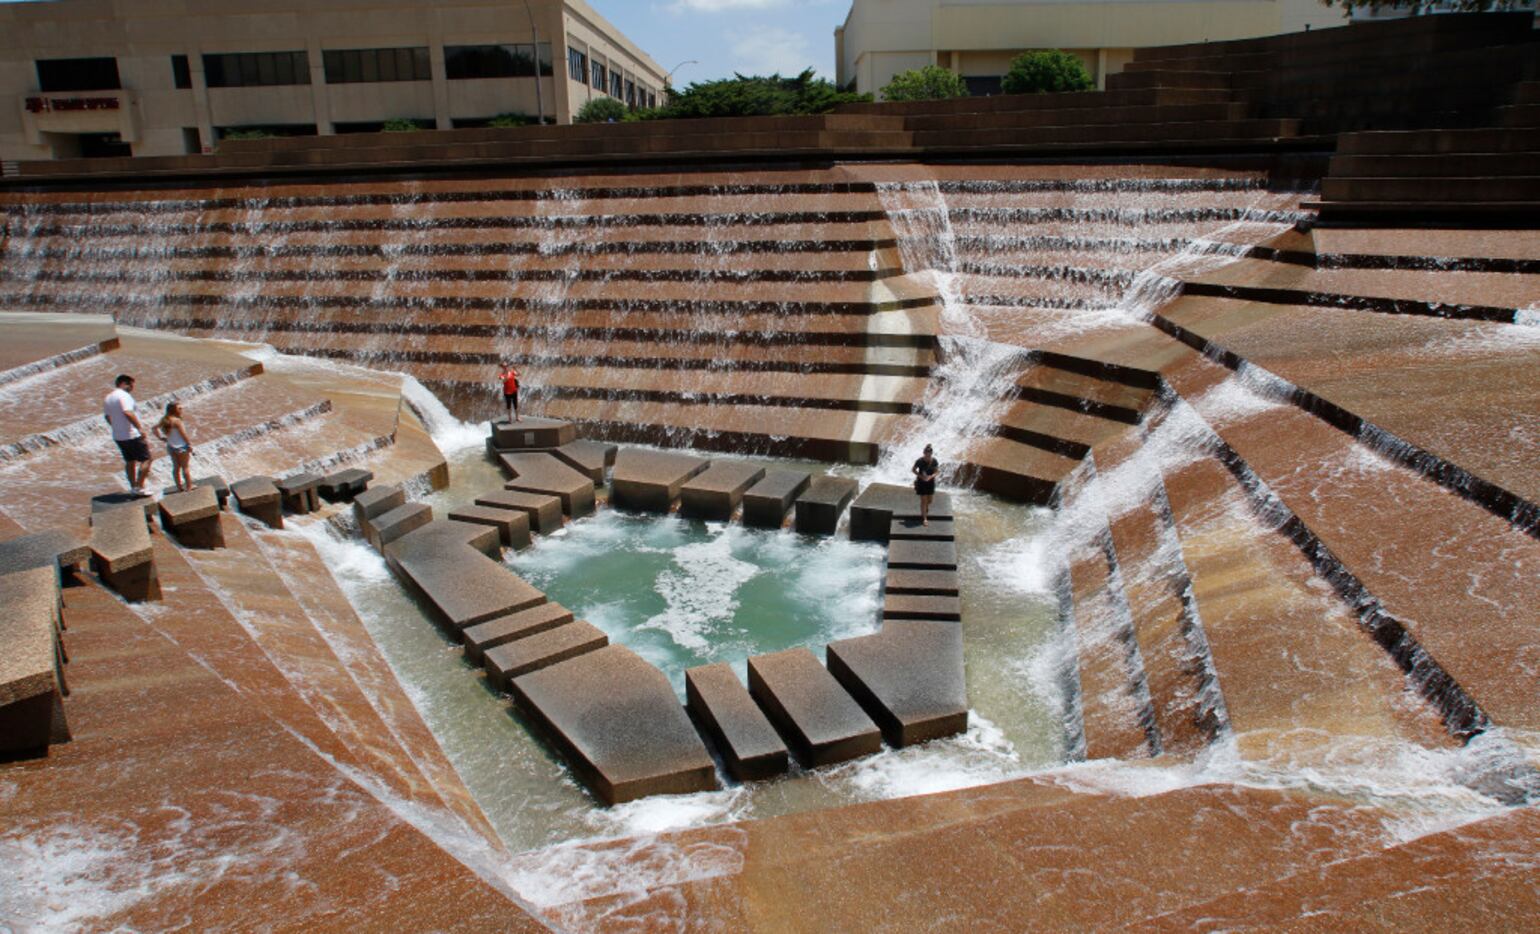 The Fort Worth Water Gardens were built in 1974.